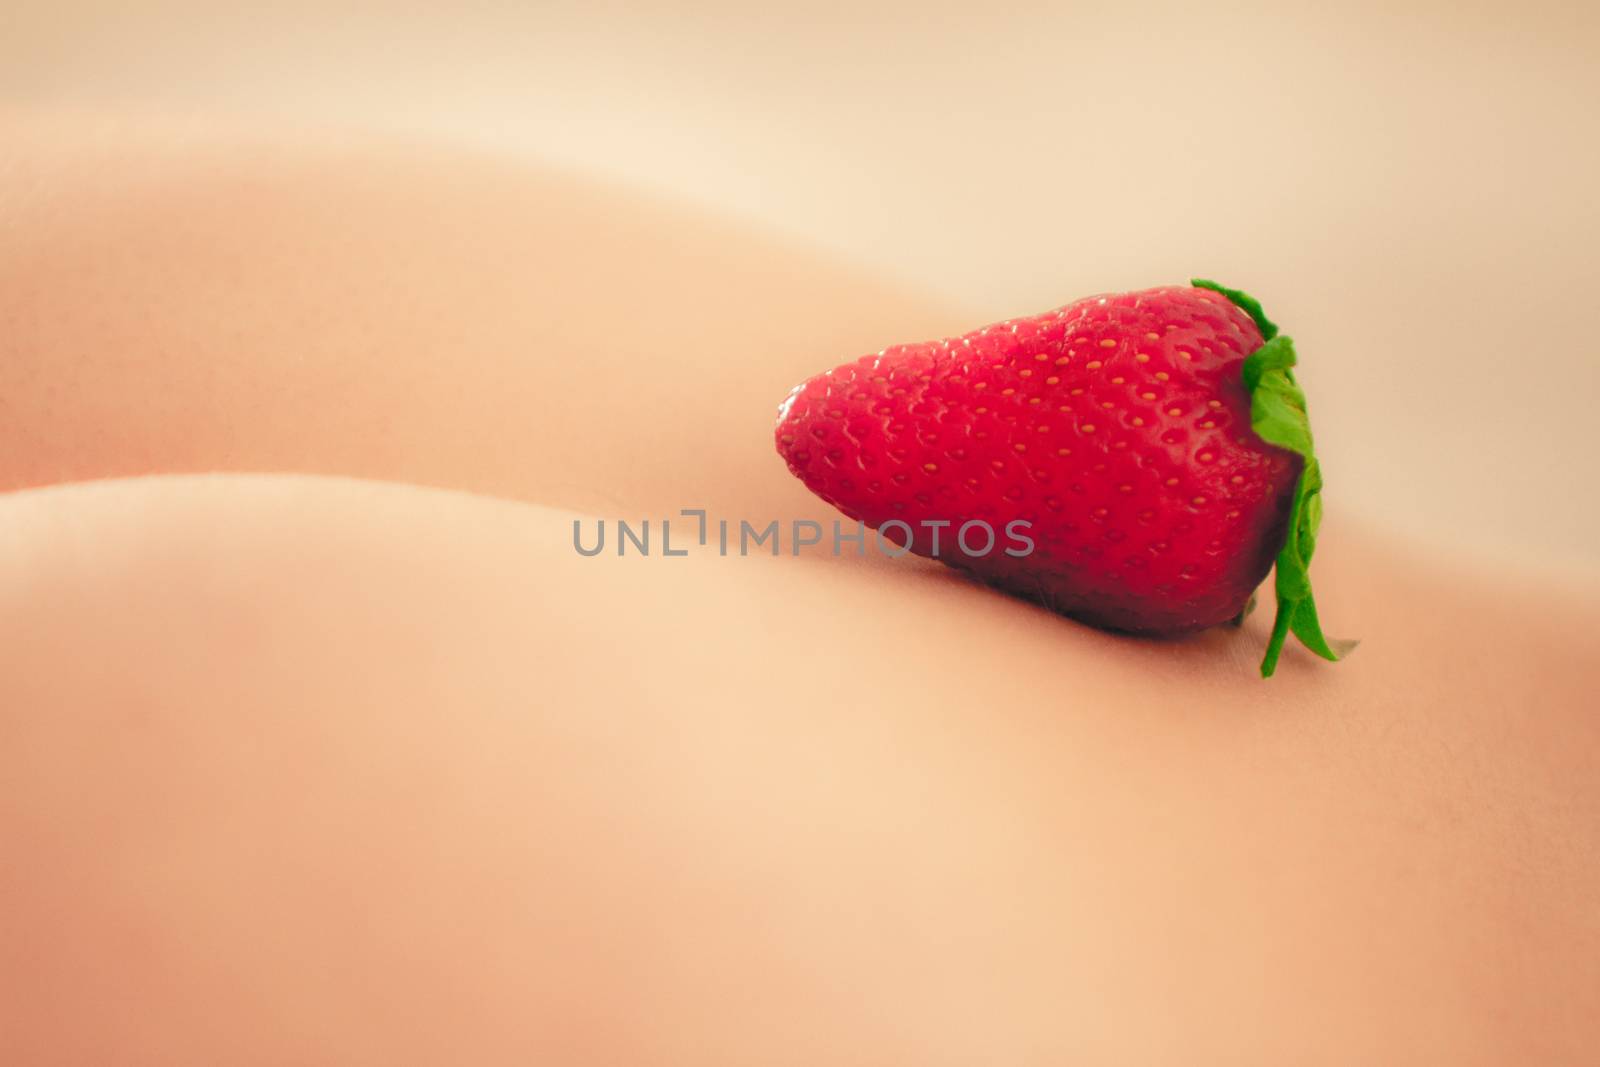 Inviting sexy back of a girl with a resting strawberry indicating the attachment of pinkish buttocks